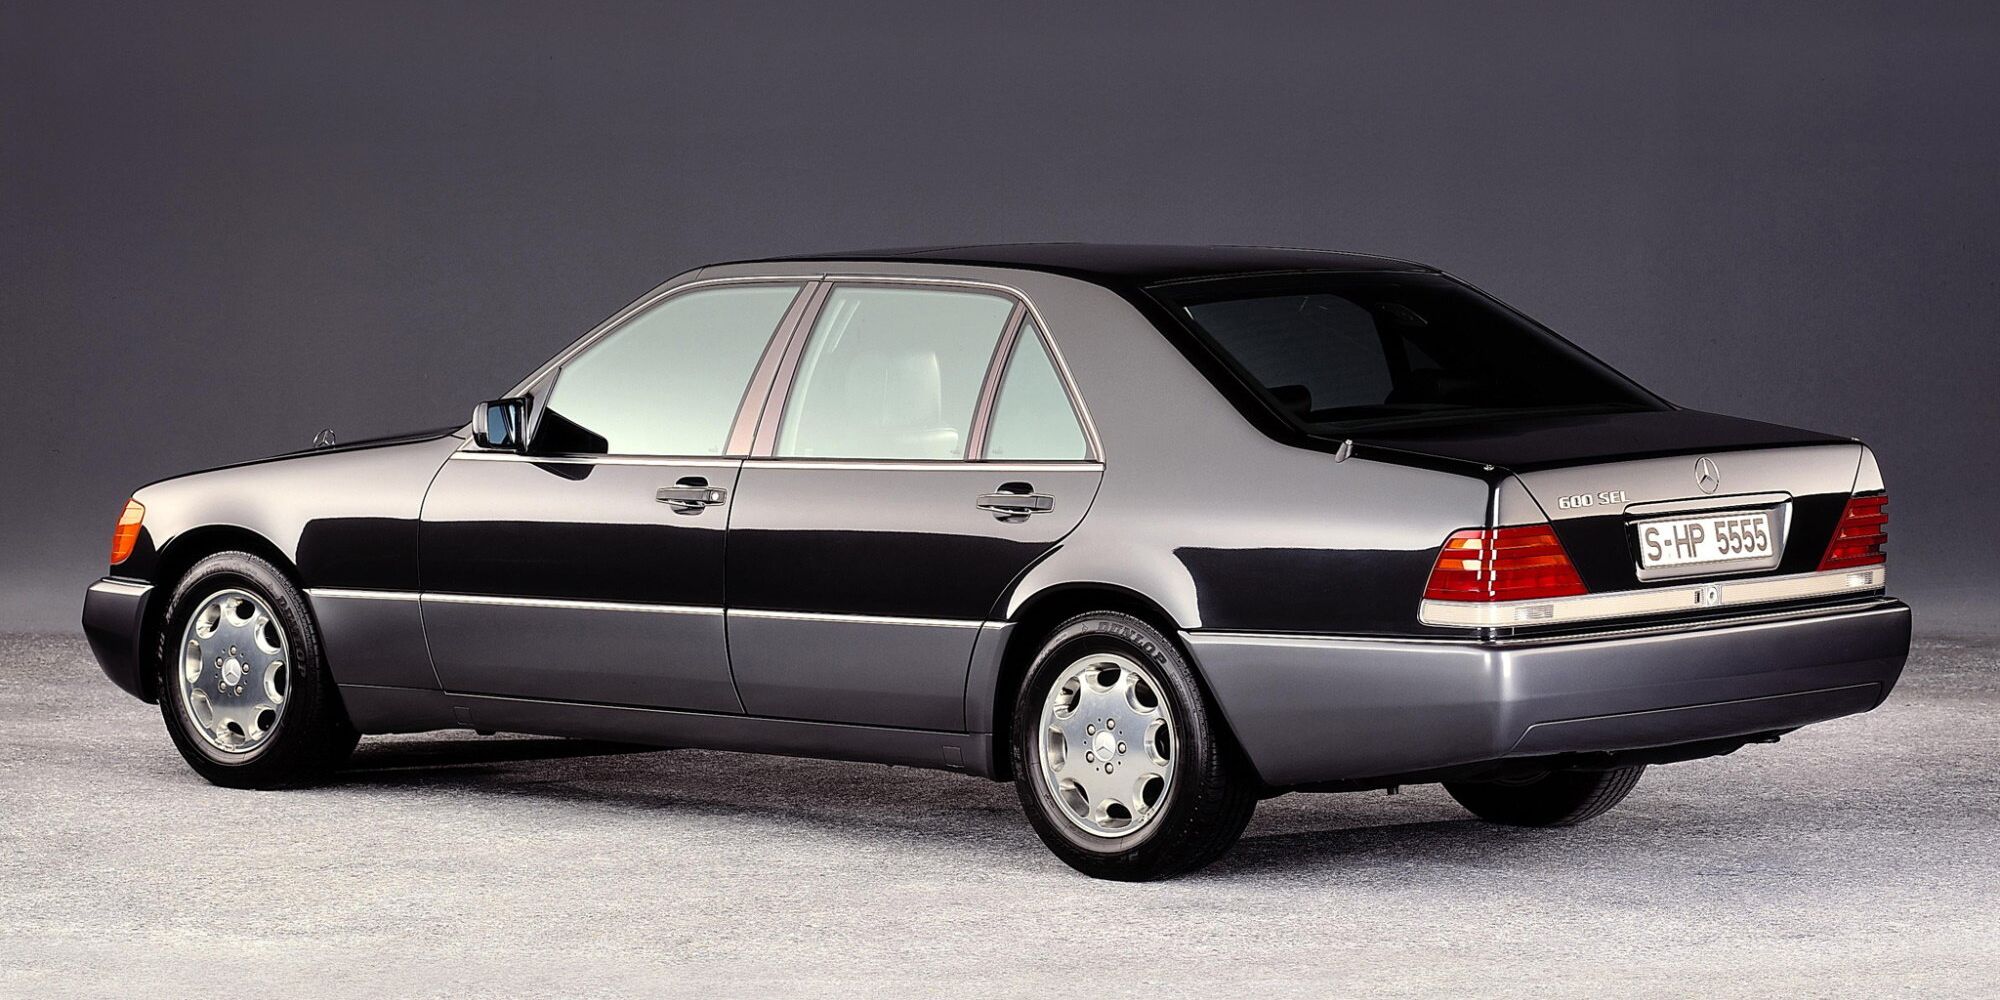 Rear 3/4 view of the W140 S600